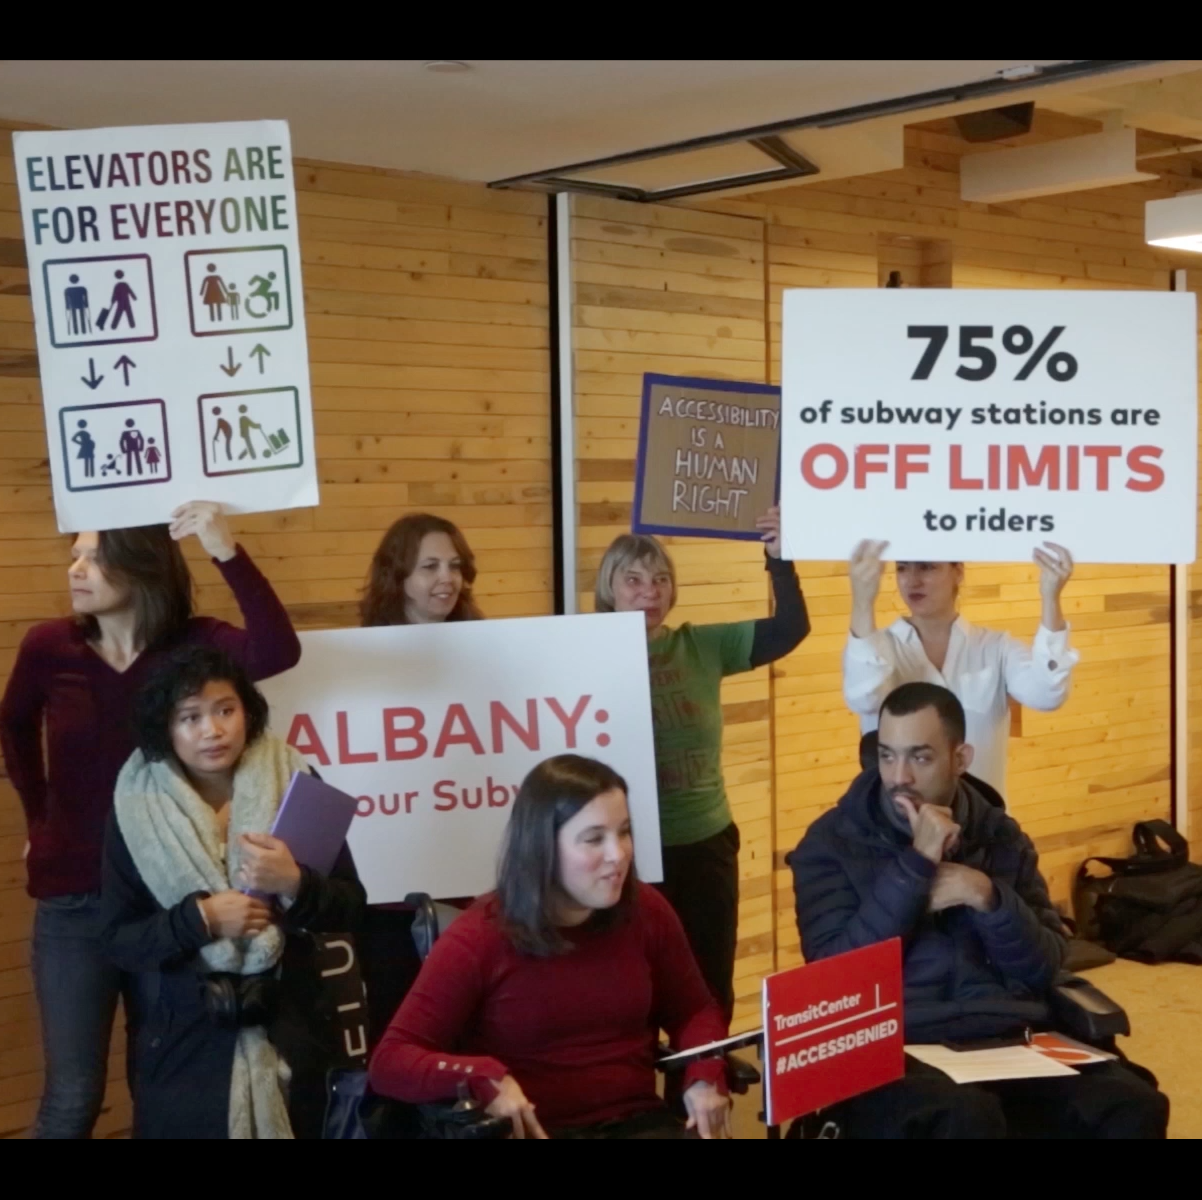 activists carry posters that read "75% of subway stations are off limits to riders" and "elevators are for everyone"